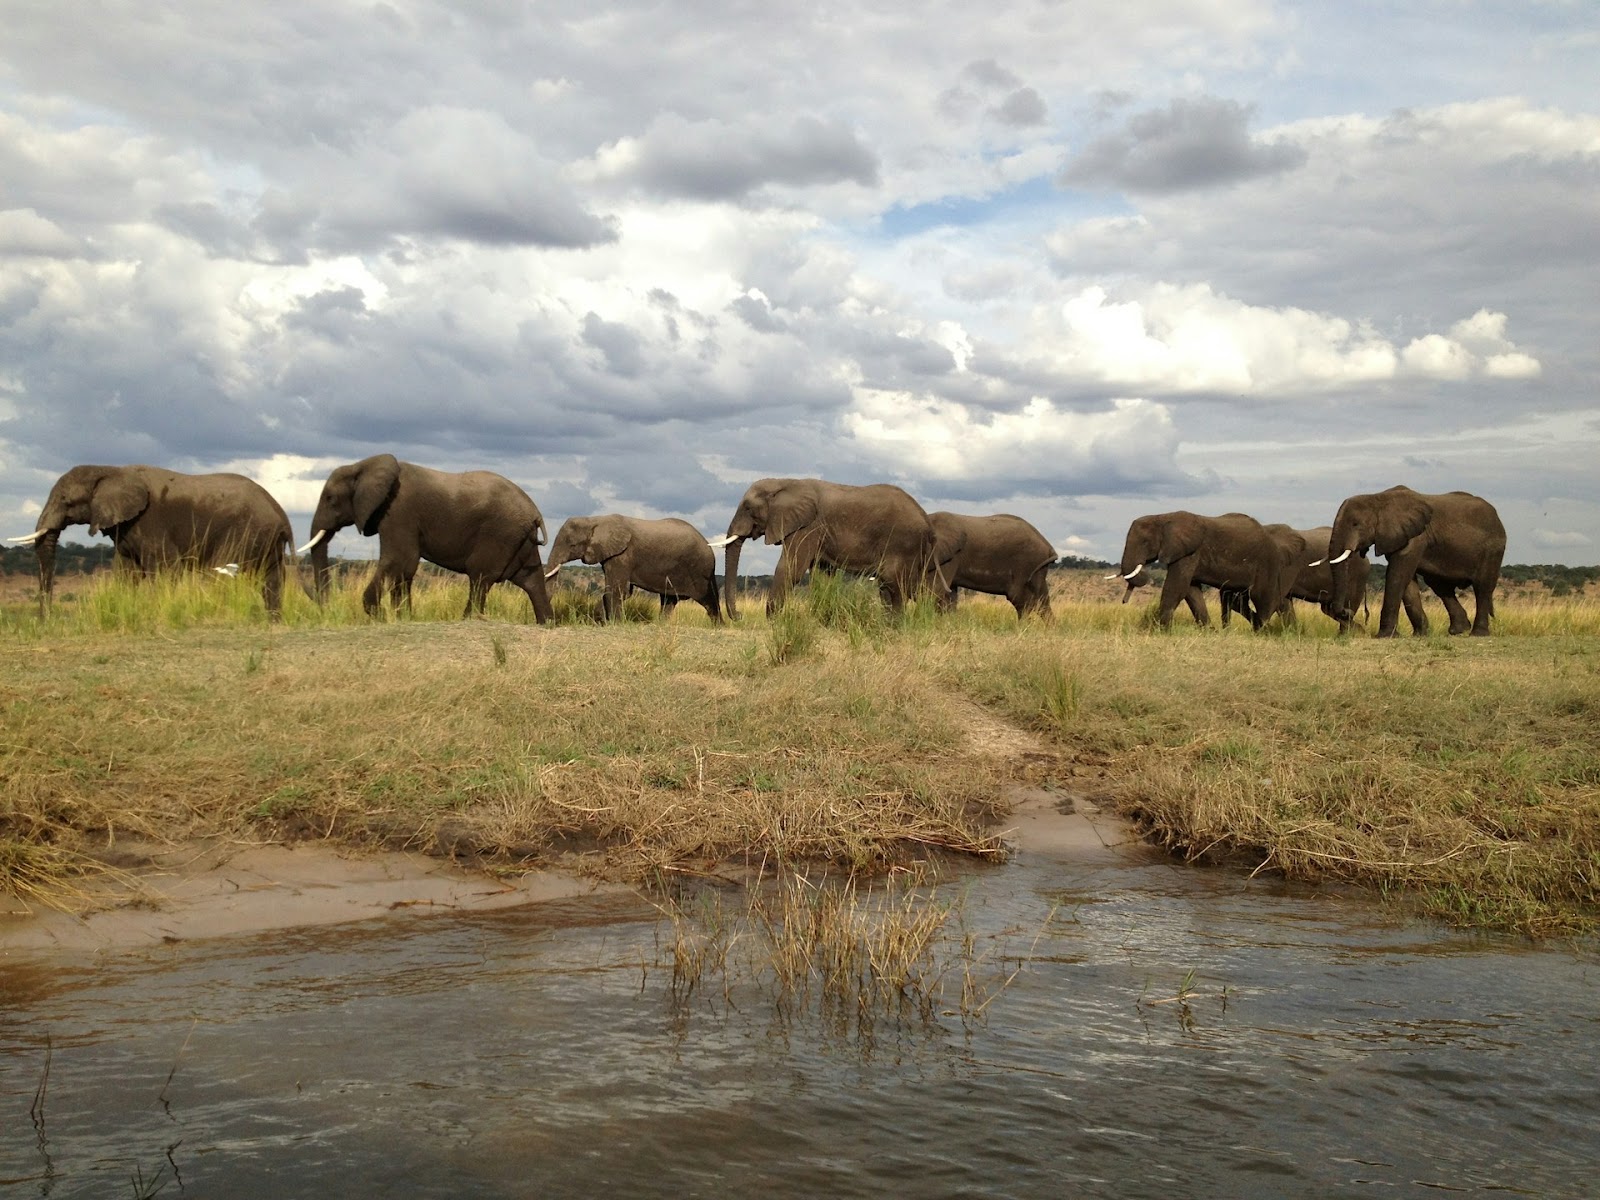 best time to visit Chobe national park and see elephants